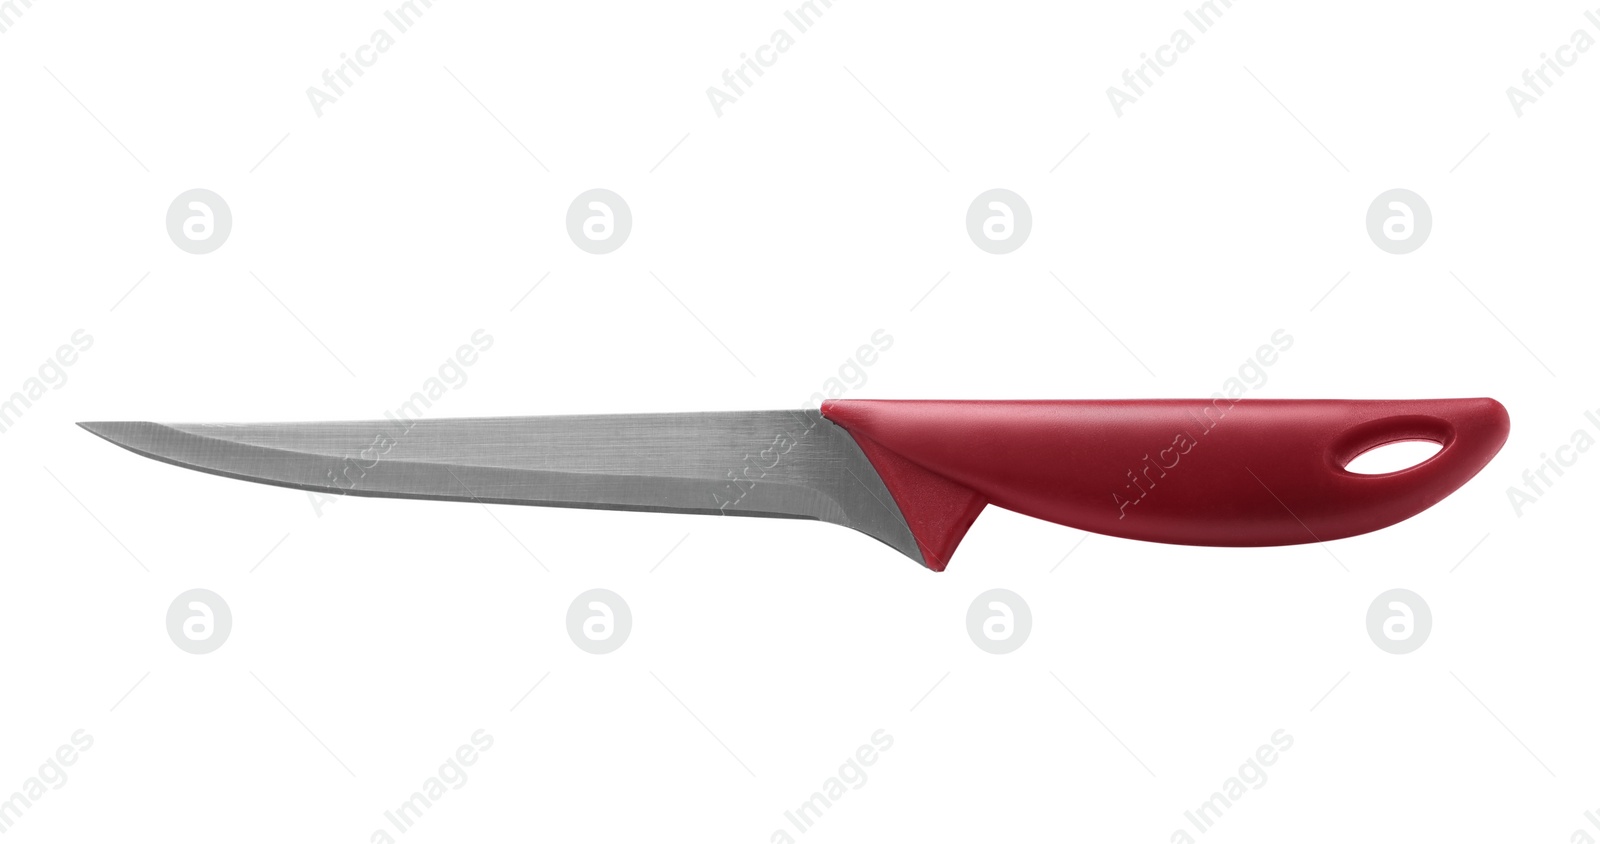 Photo of Stainless steel boning knife with plastic handle isolated on white